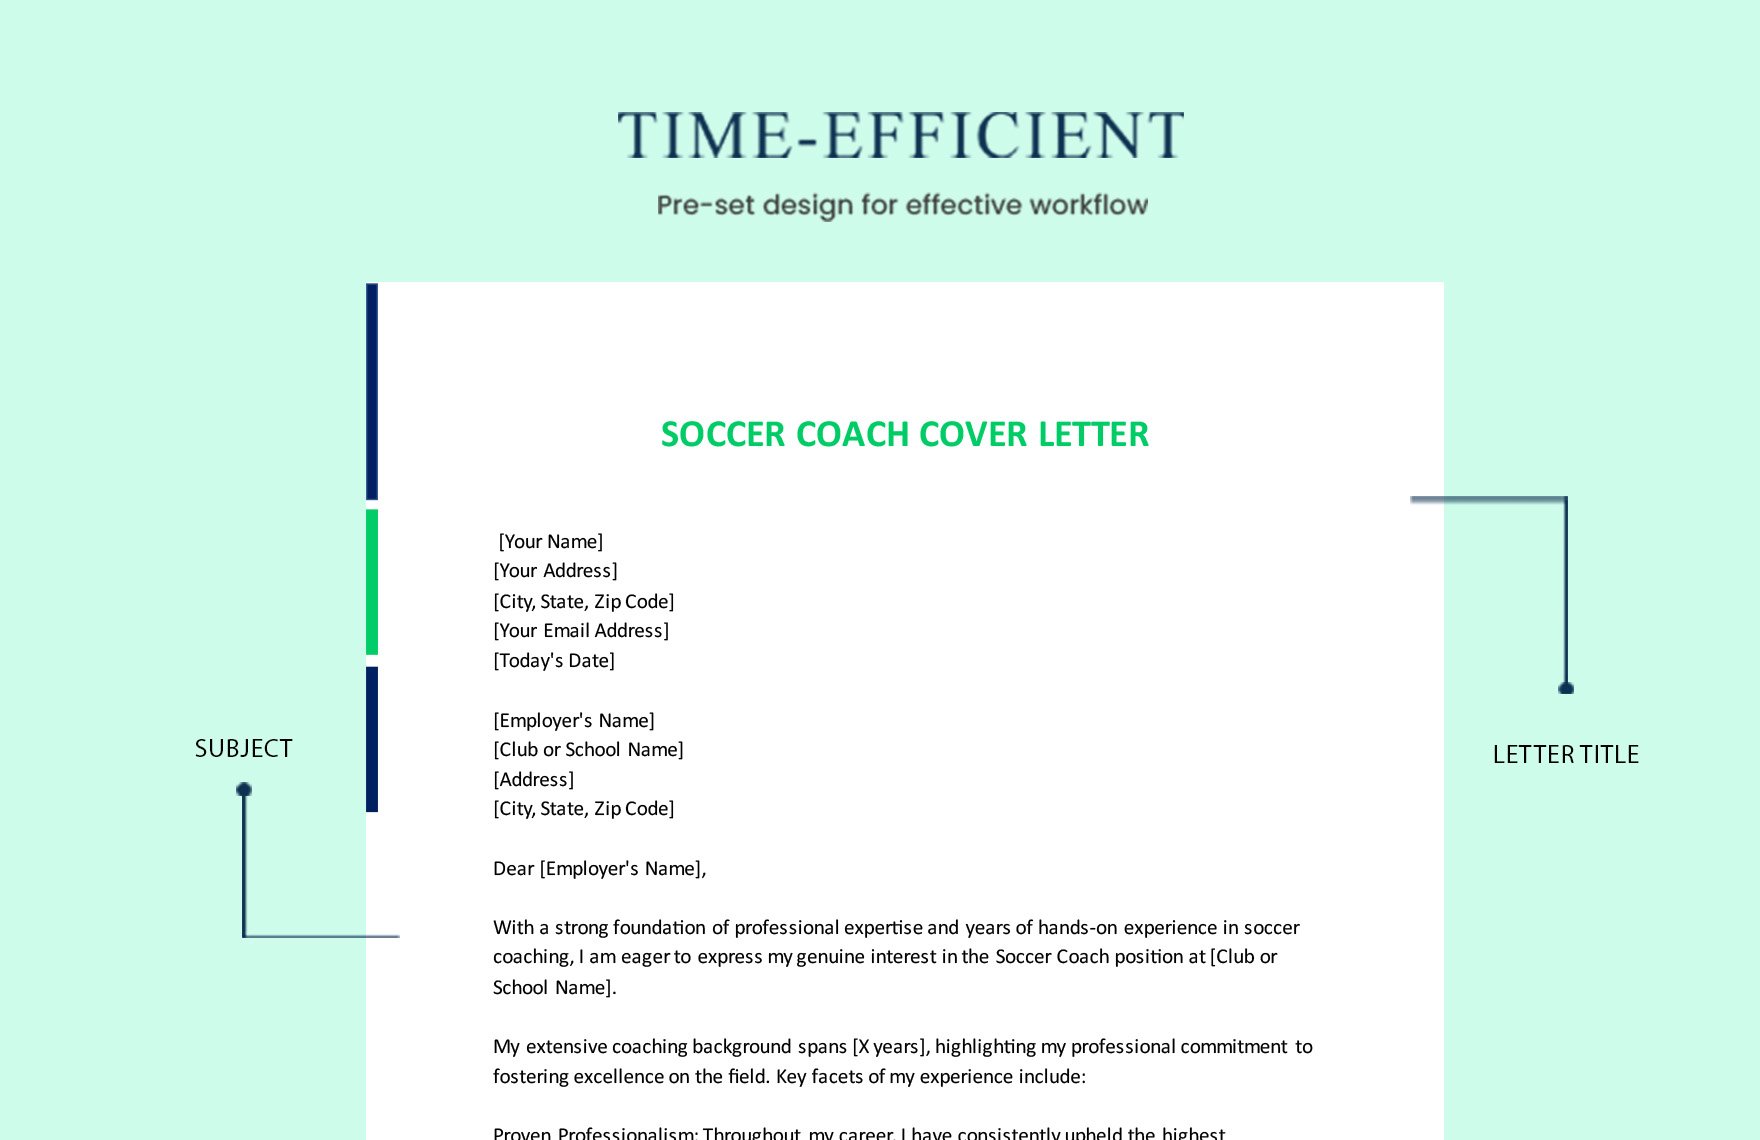 Soccer Coach Cover Letter